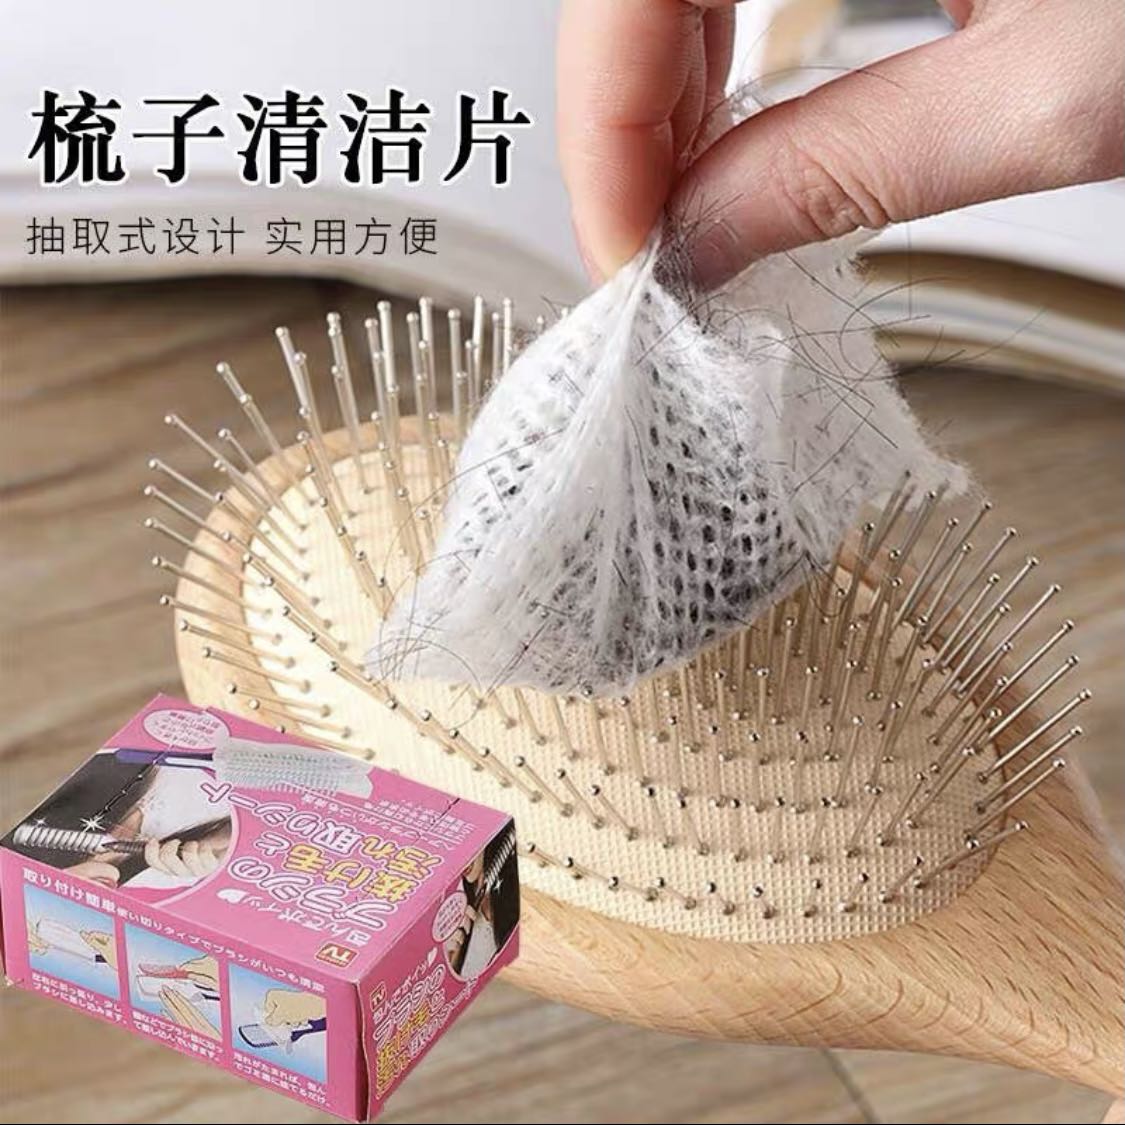 50pcs Hairbrush Cleaner Tool Set For Cushion Brush, Air Cushion Comb,  Cylinder Brush, Round Brush Including Cleaning Paper